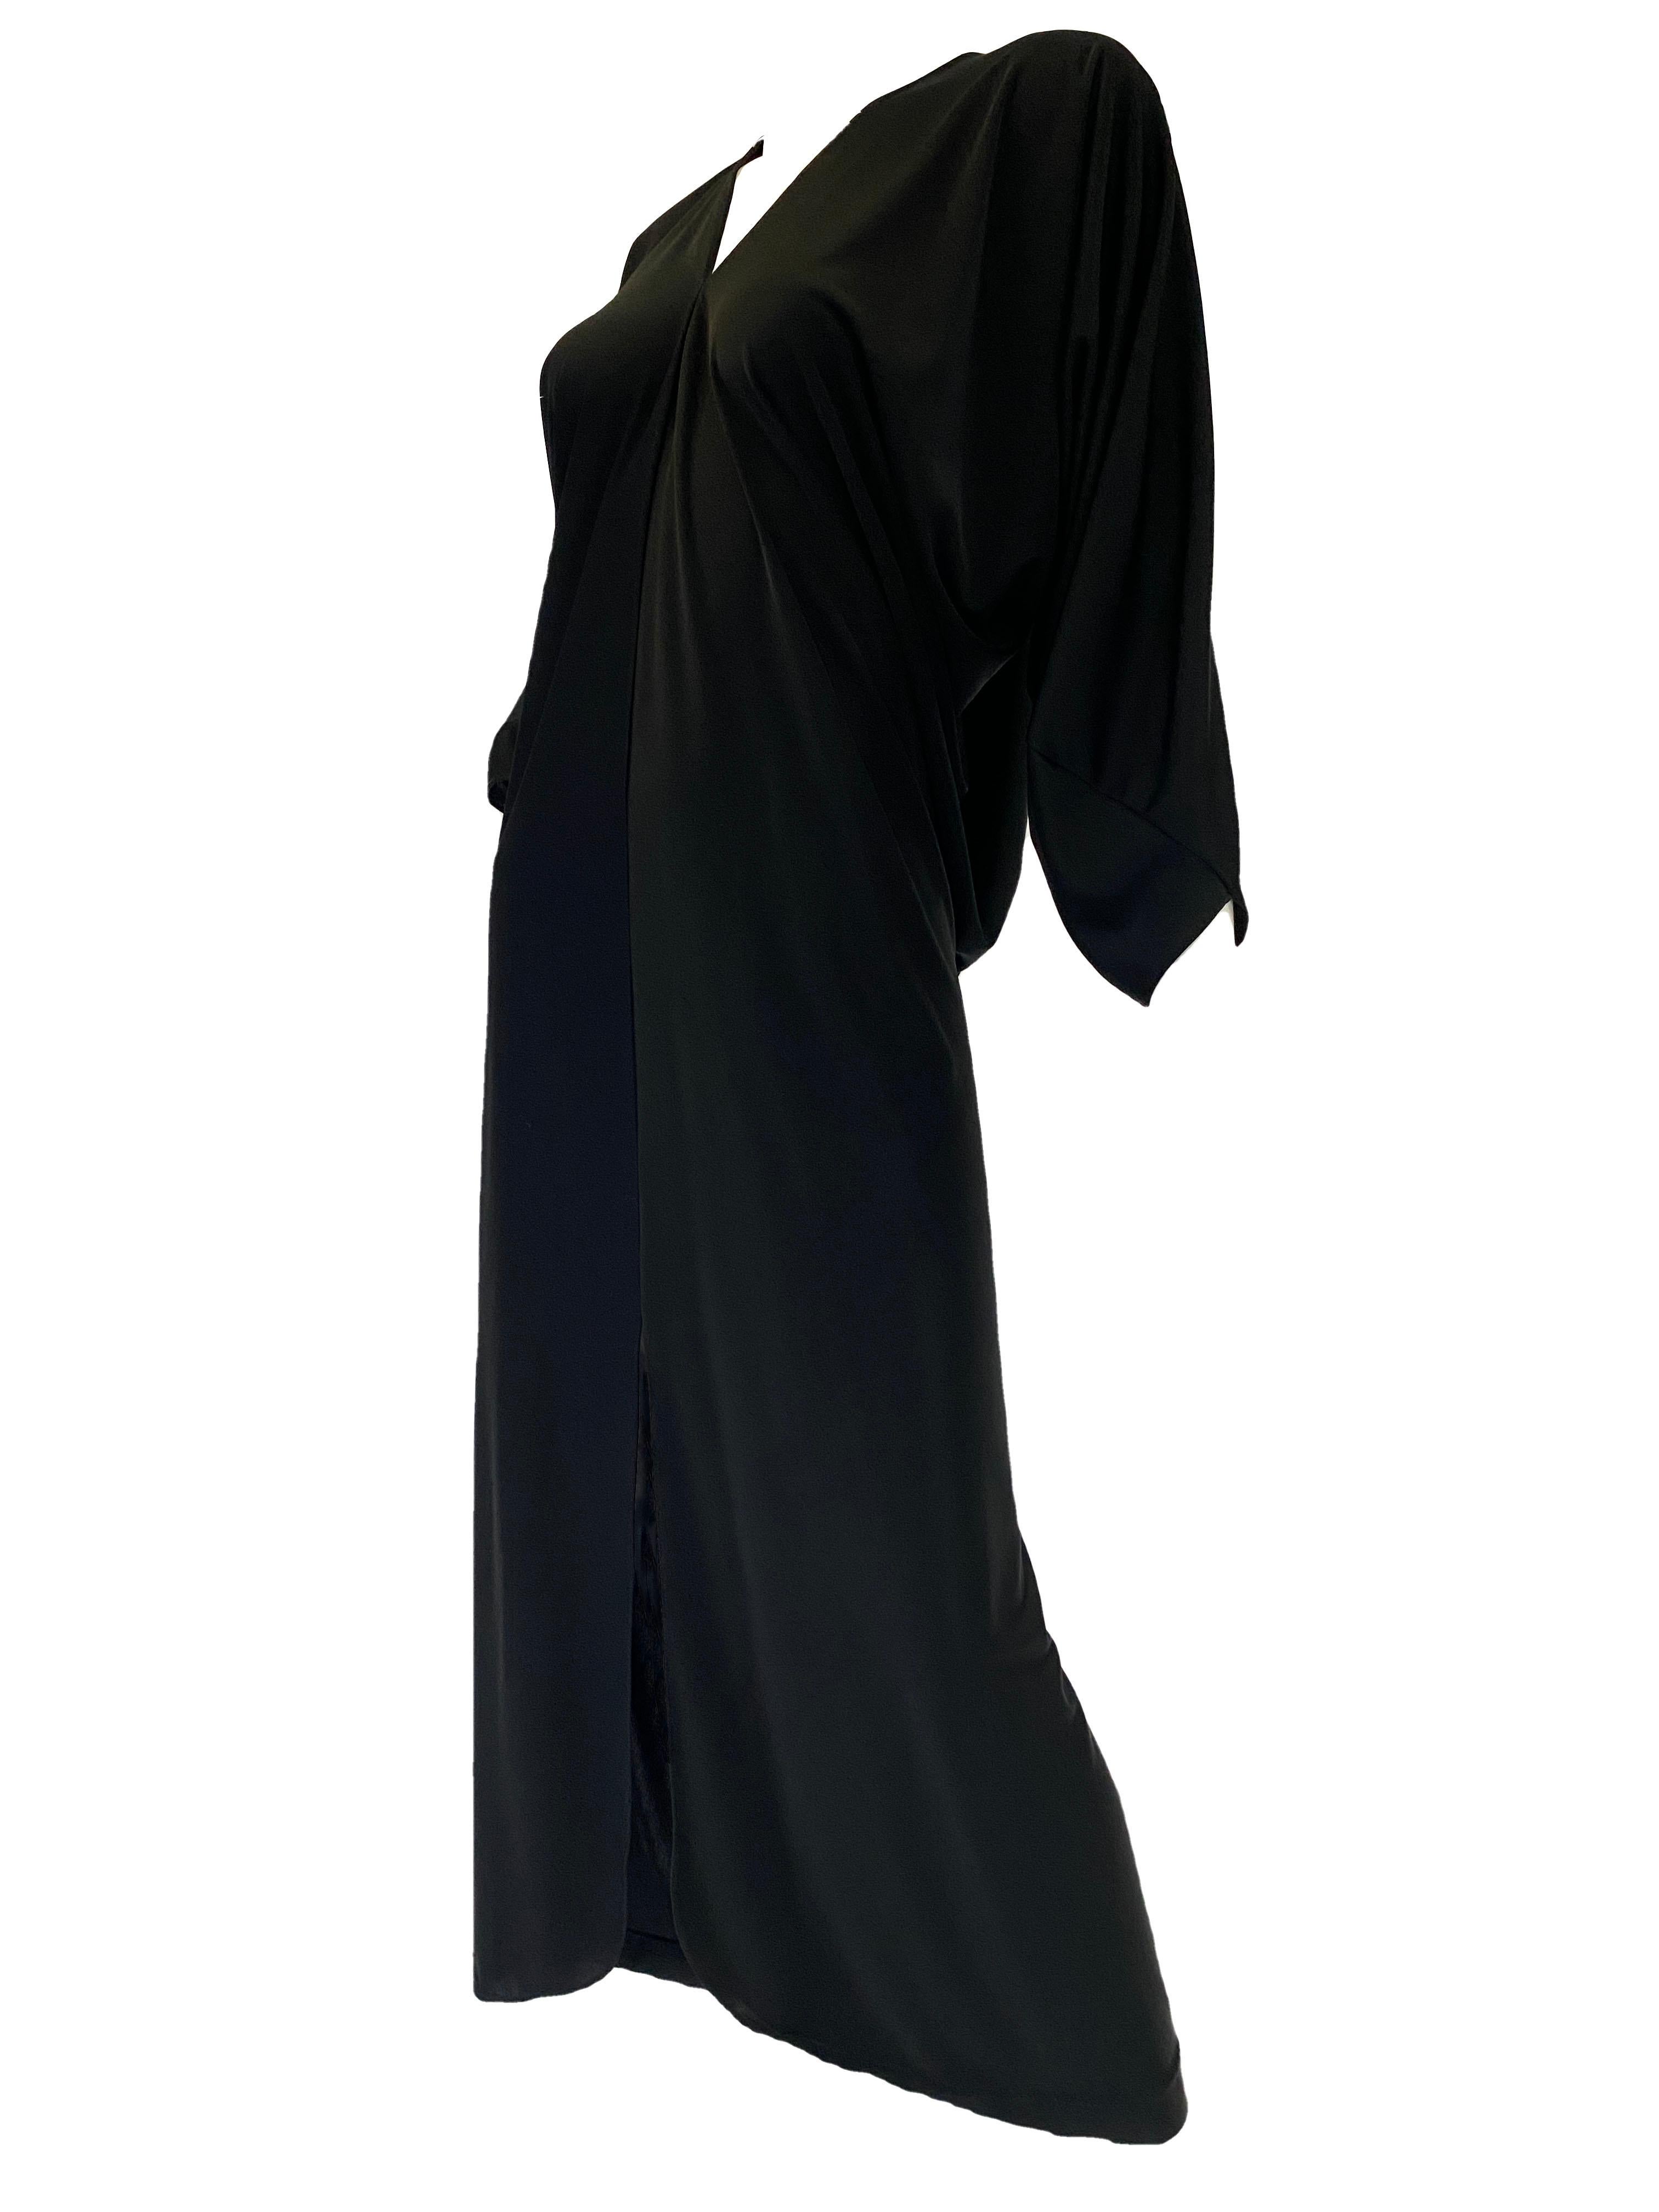 1980s Halston IV Black Jersey Knit Dolman Sleeved Kaftan

Simple, elegant, and small splash of detail: all the components within a classic Halston piece. 

This Kaftan's cut features a deep v neck with a seam the comes down to a slit that allows for